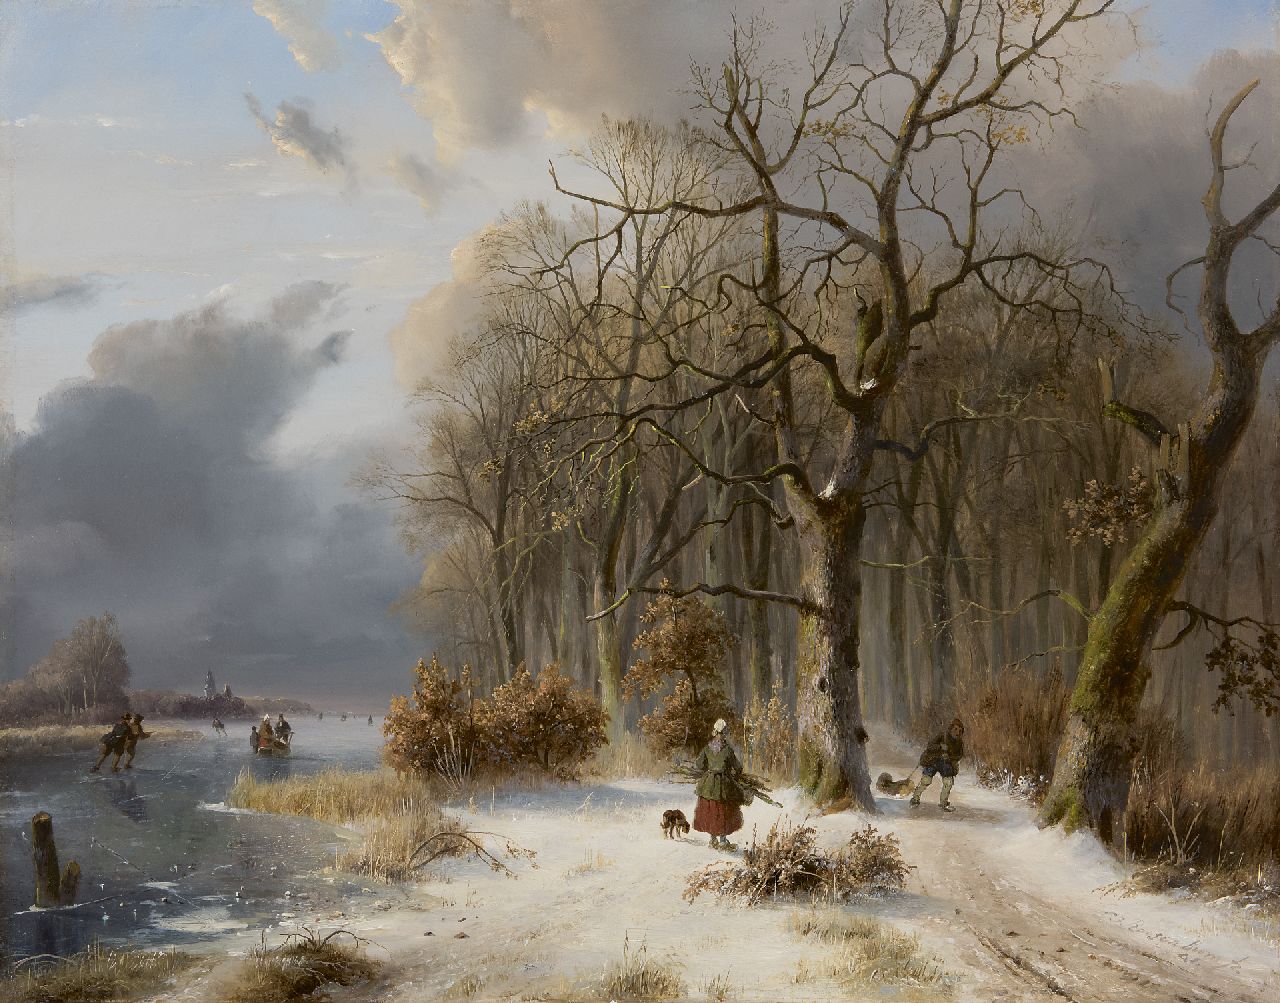 Roosenboom N.J.  | Nicolaas Johannes Roosenboom, Wood gatherers and skaters in a winterlandscape, oil on panel 49.4 x 63.0 cm, signed l.r. and dated '41